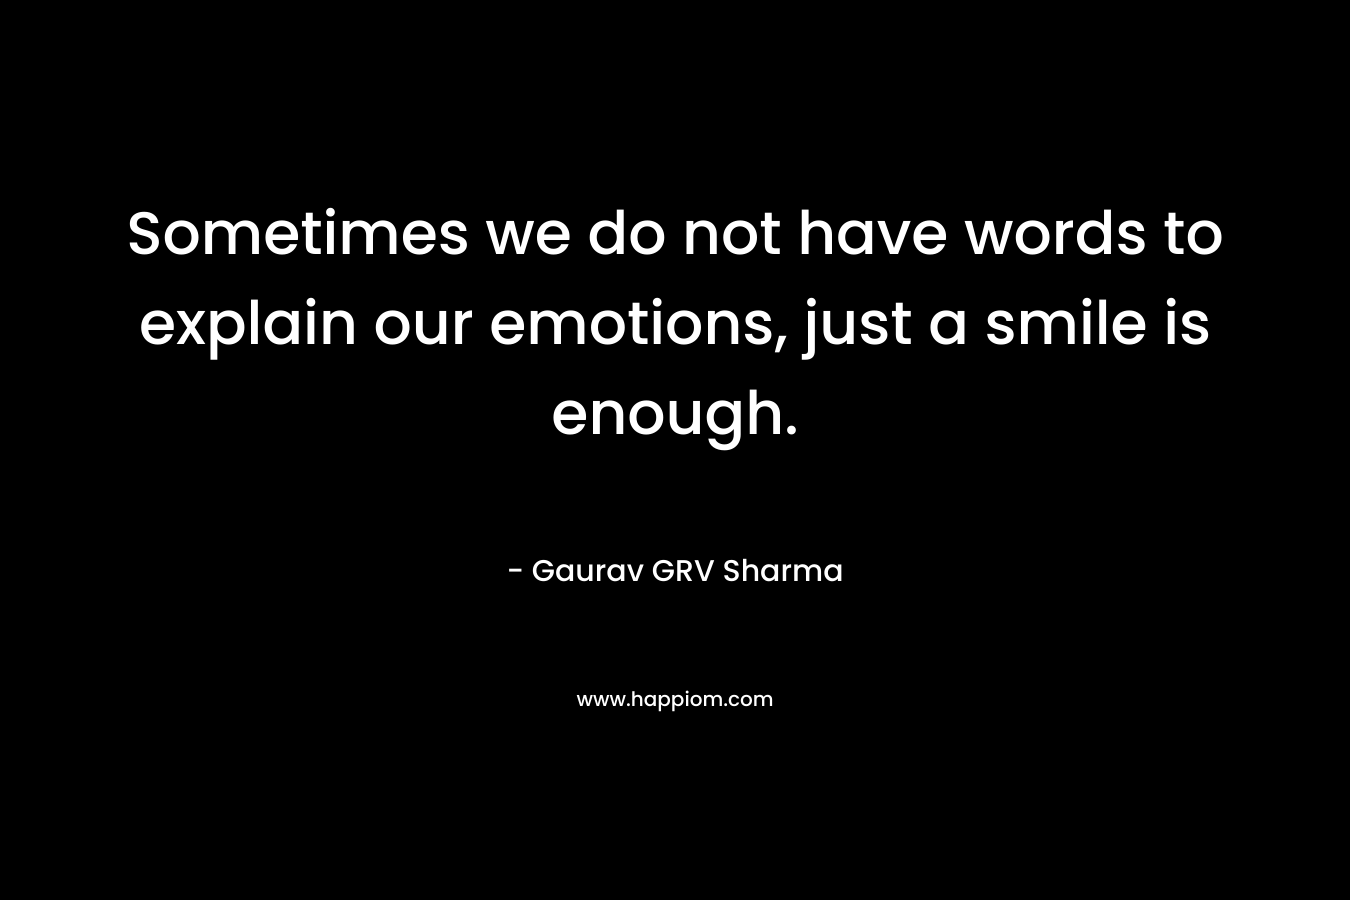 Sometimes we do not have words to explain our emotions, just a smile is enough. – Gaurav GRV Sharma